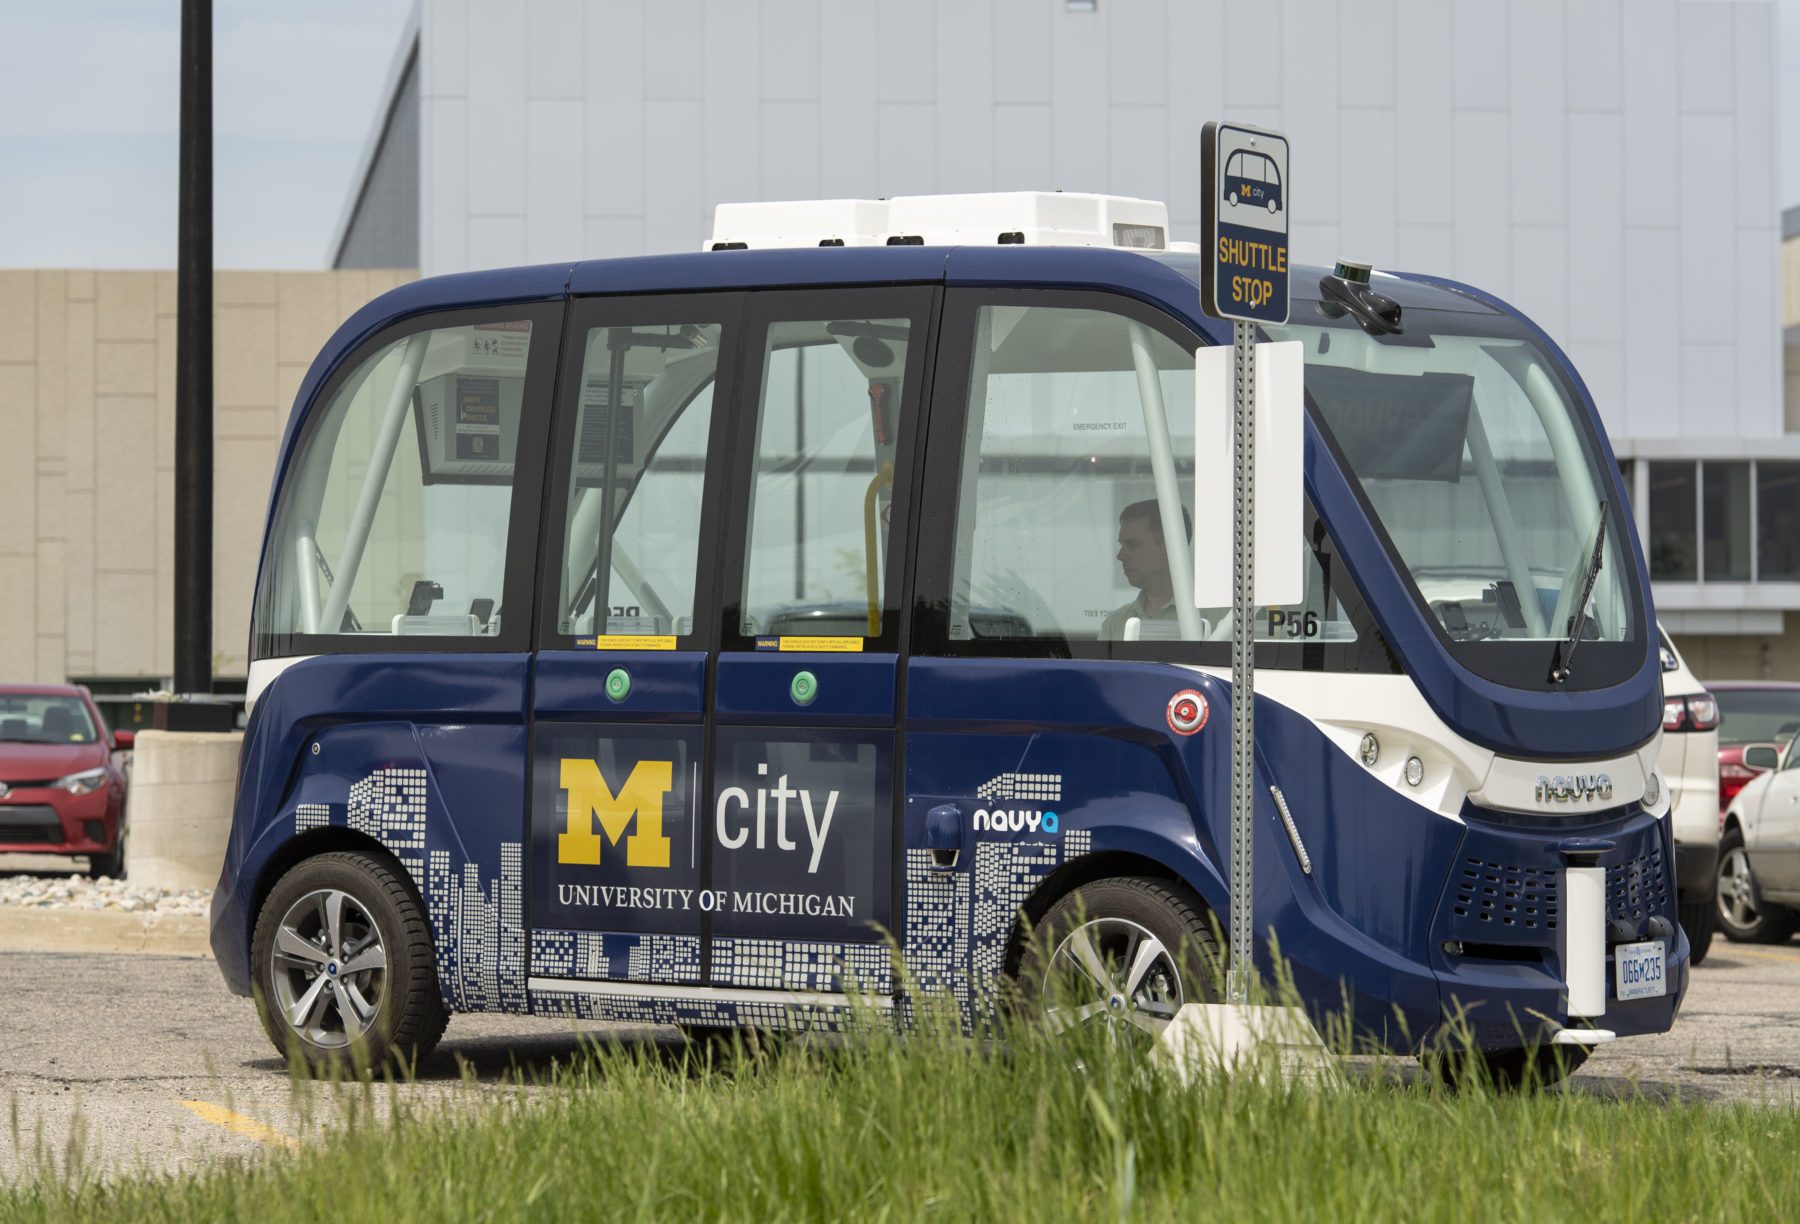 MCity's autonomous driving shuttle moving passengers around the NCRC Building on the University of Michigan's North Campus on May 18, 2018.